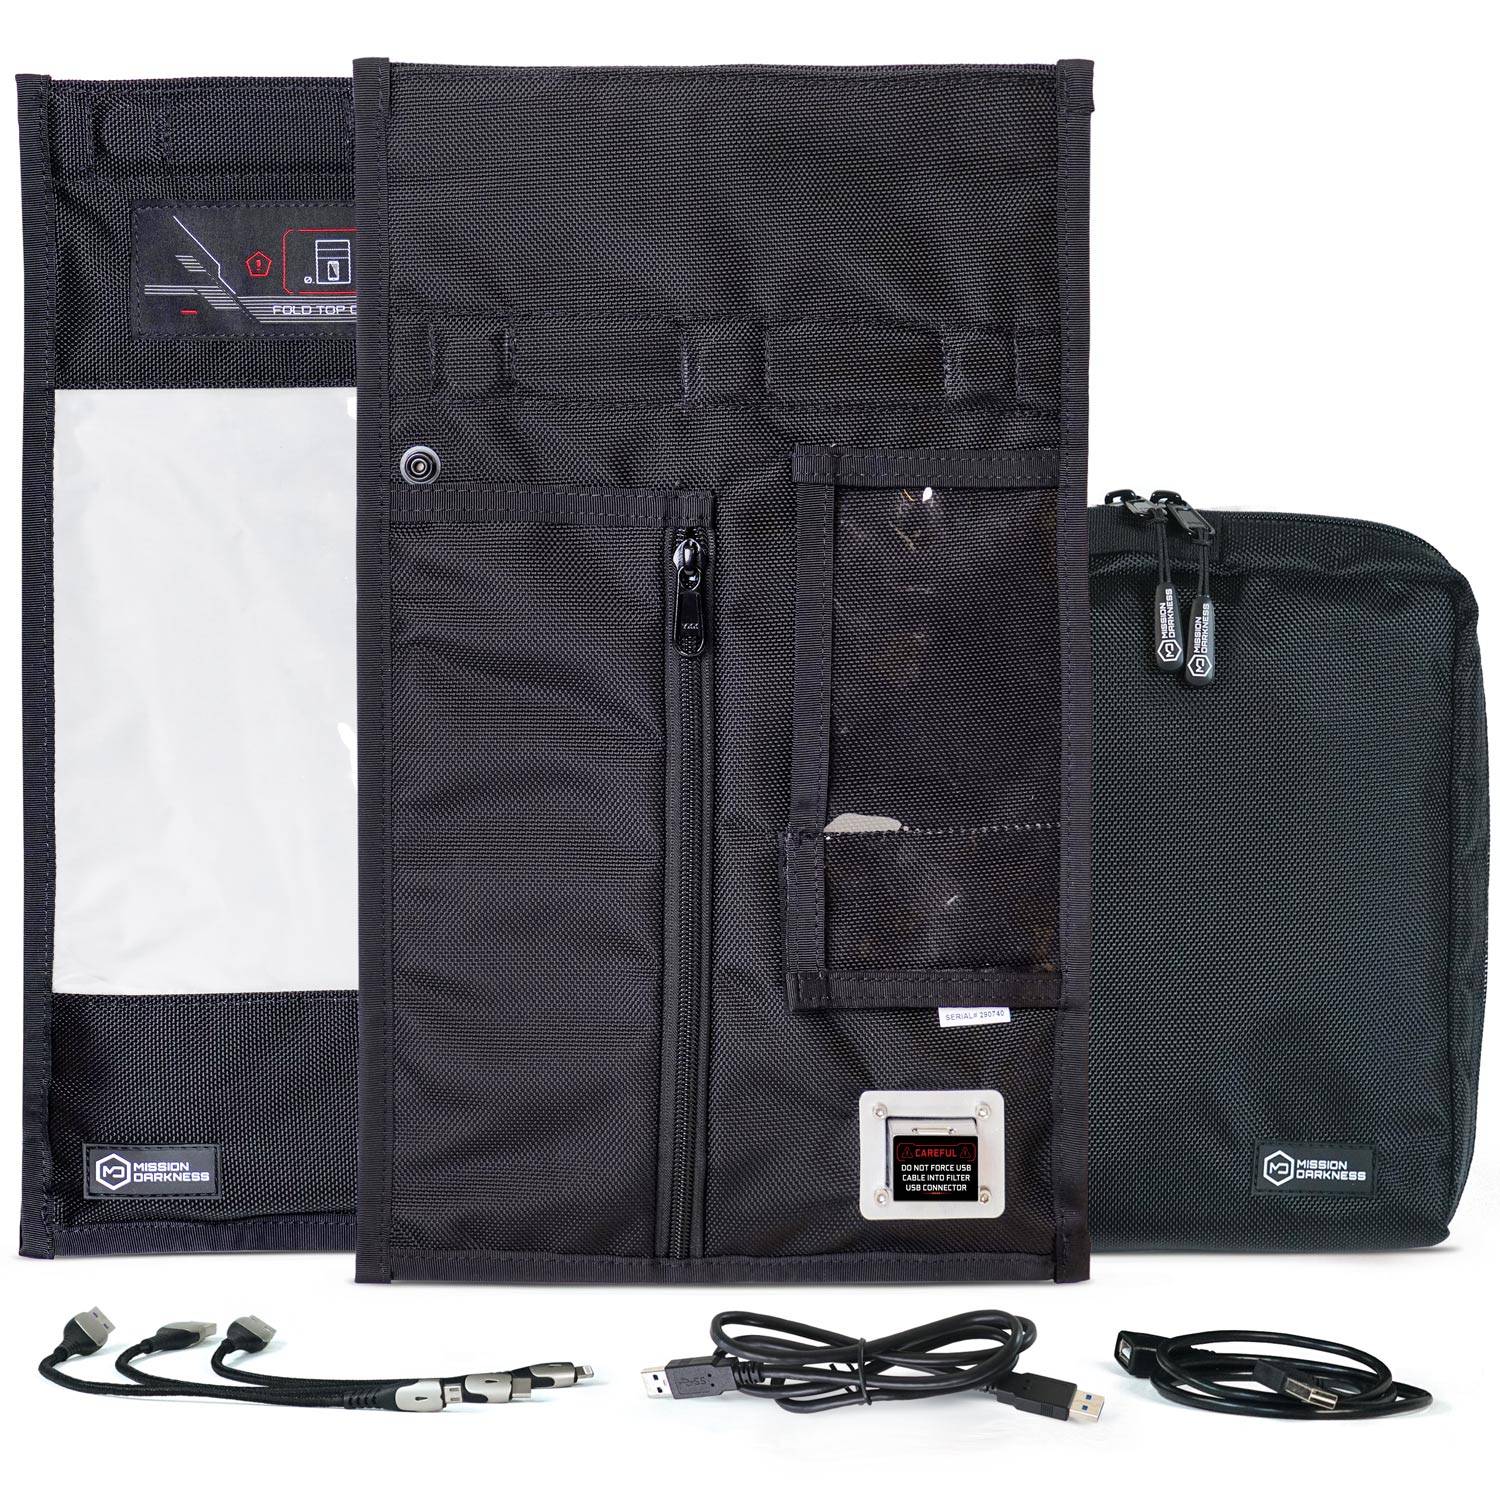 Mission Darkness Window Charge & Shield Faraday Bag with USB filter for seamless data extraction and charging